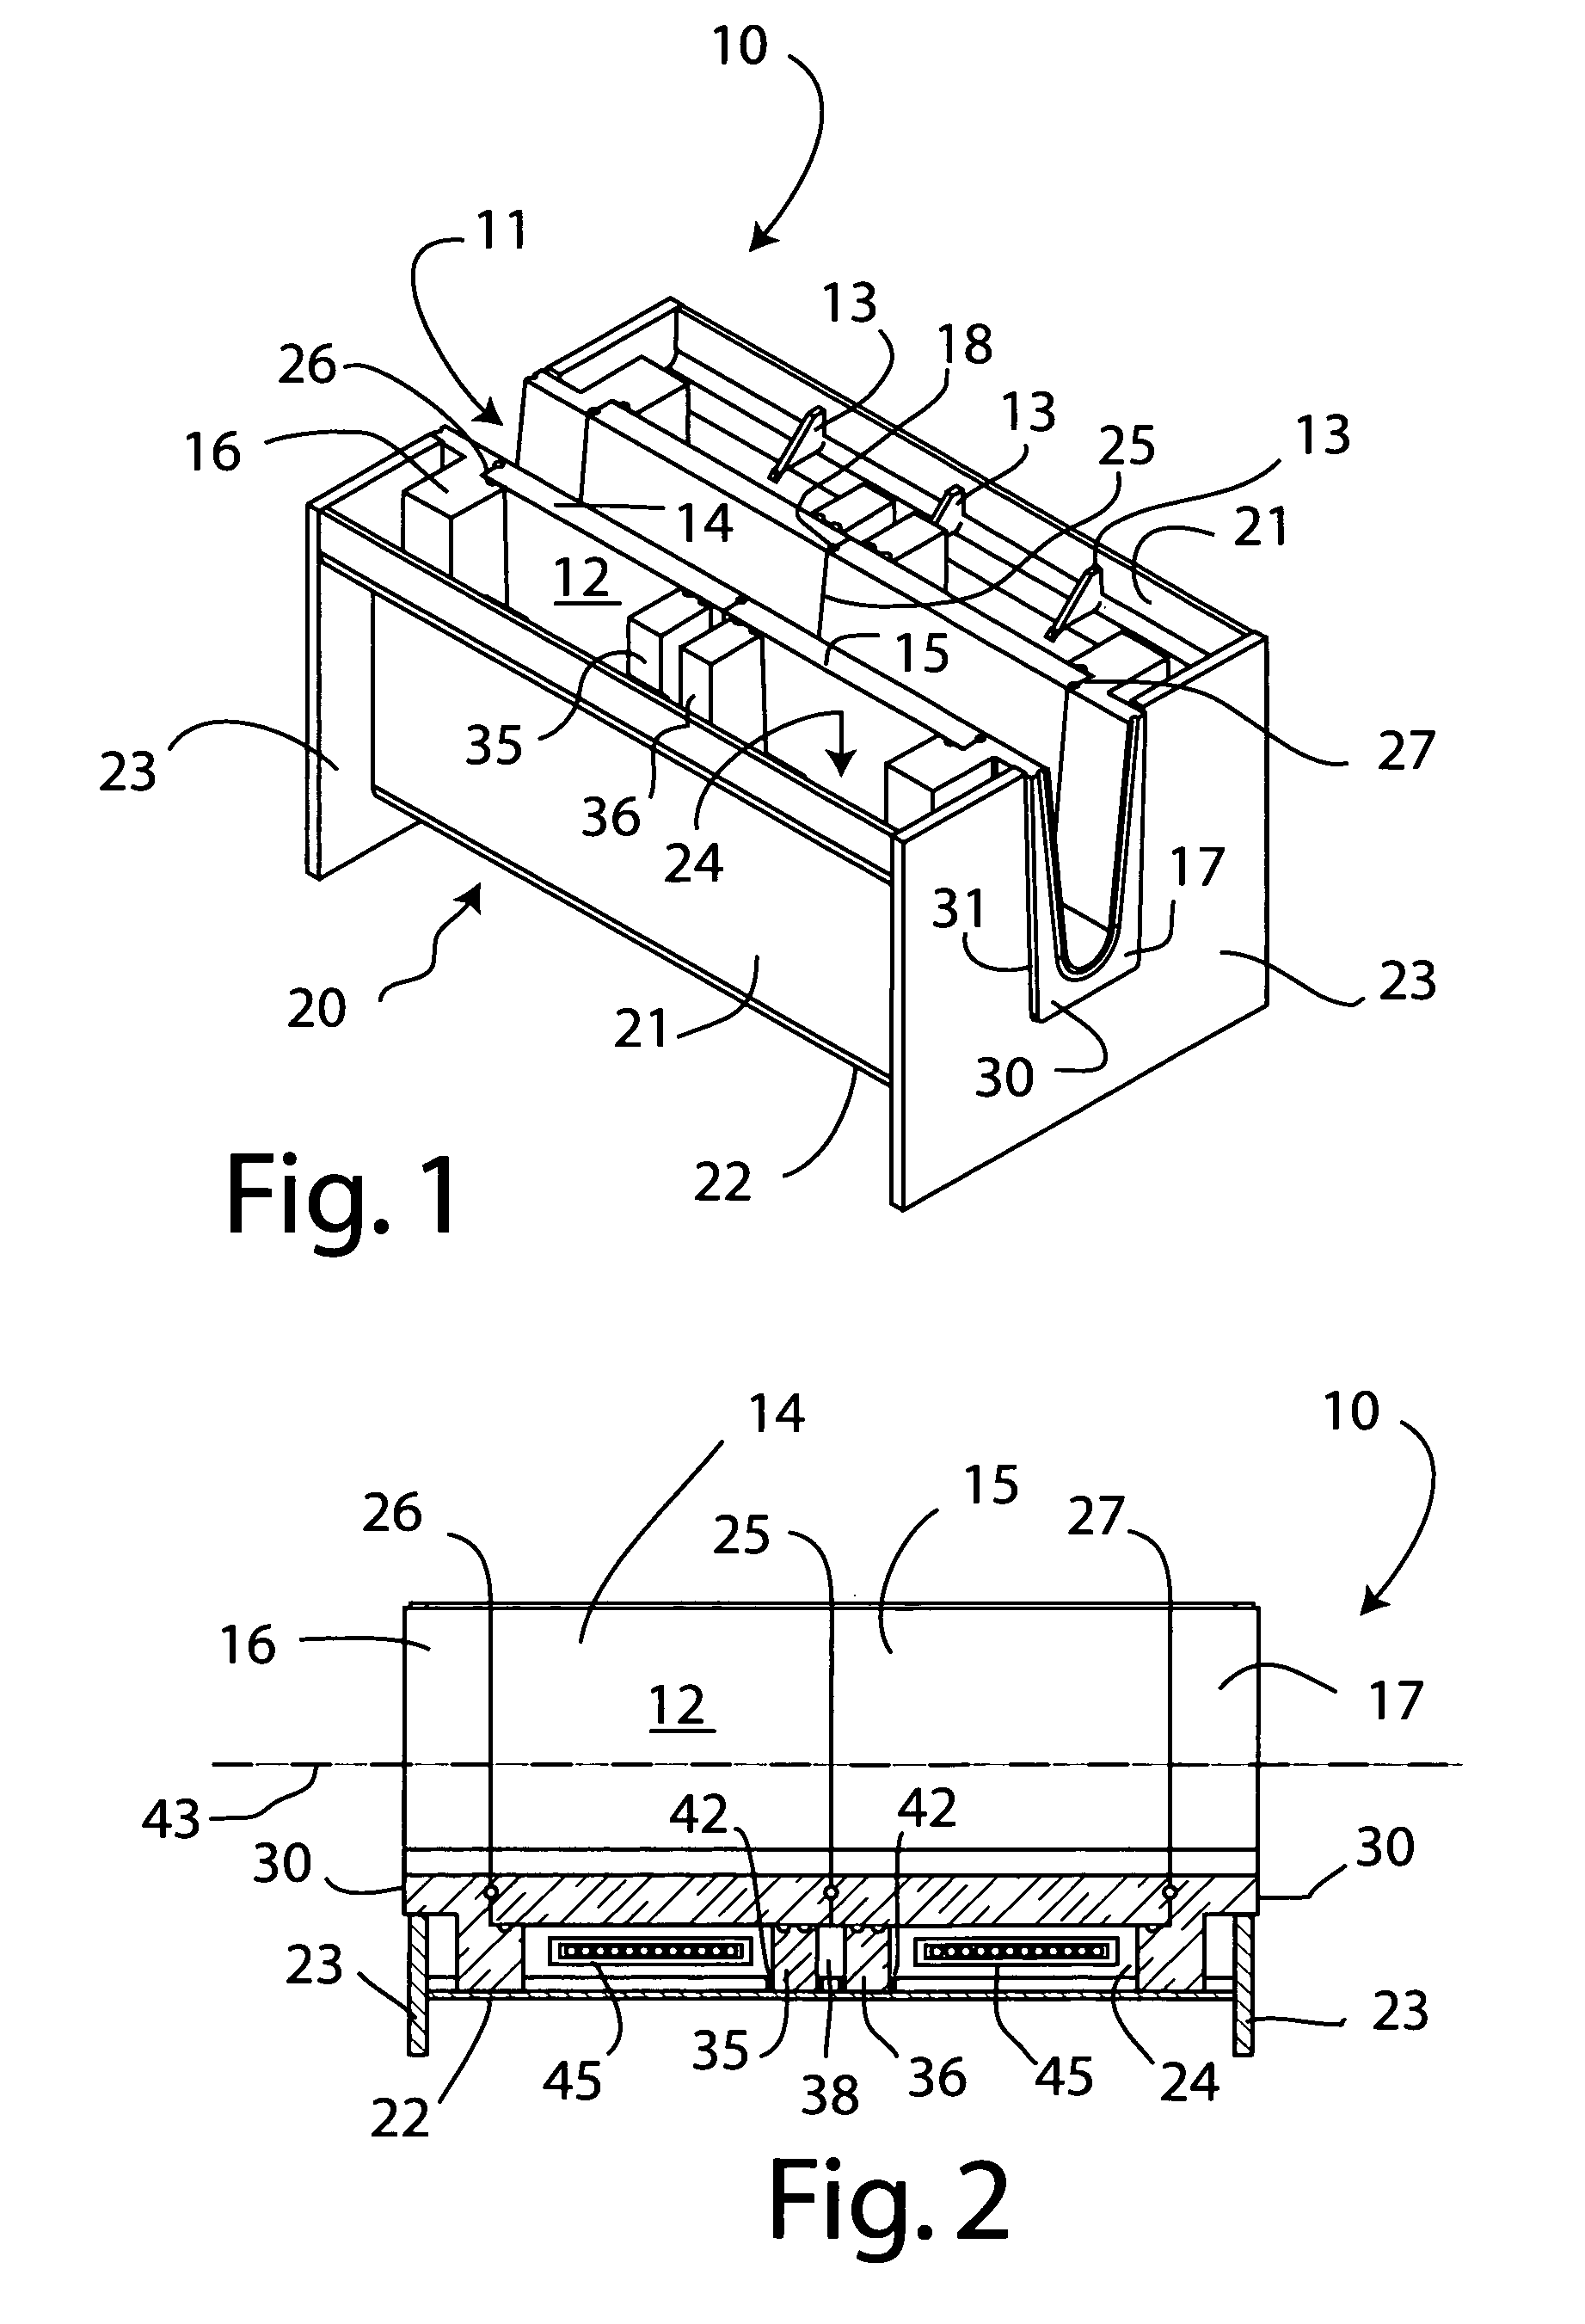 Molten metal leakage confinement and thermal optimization in vessels used for containing molten metal